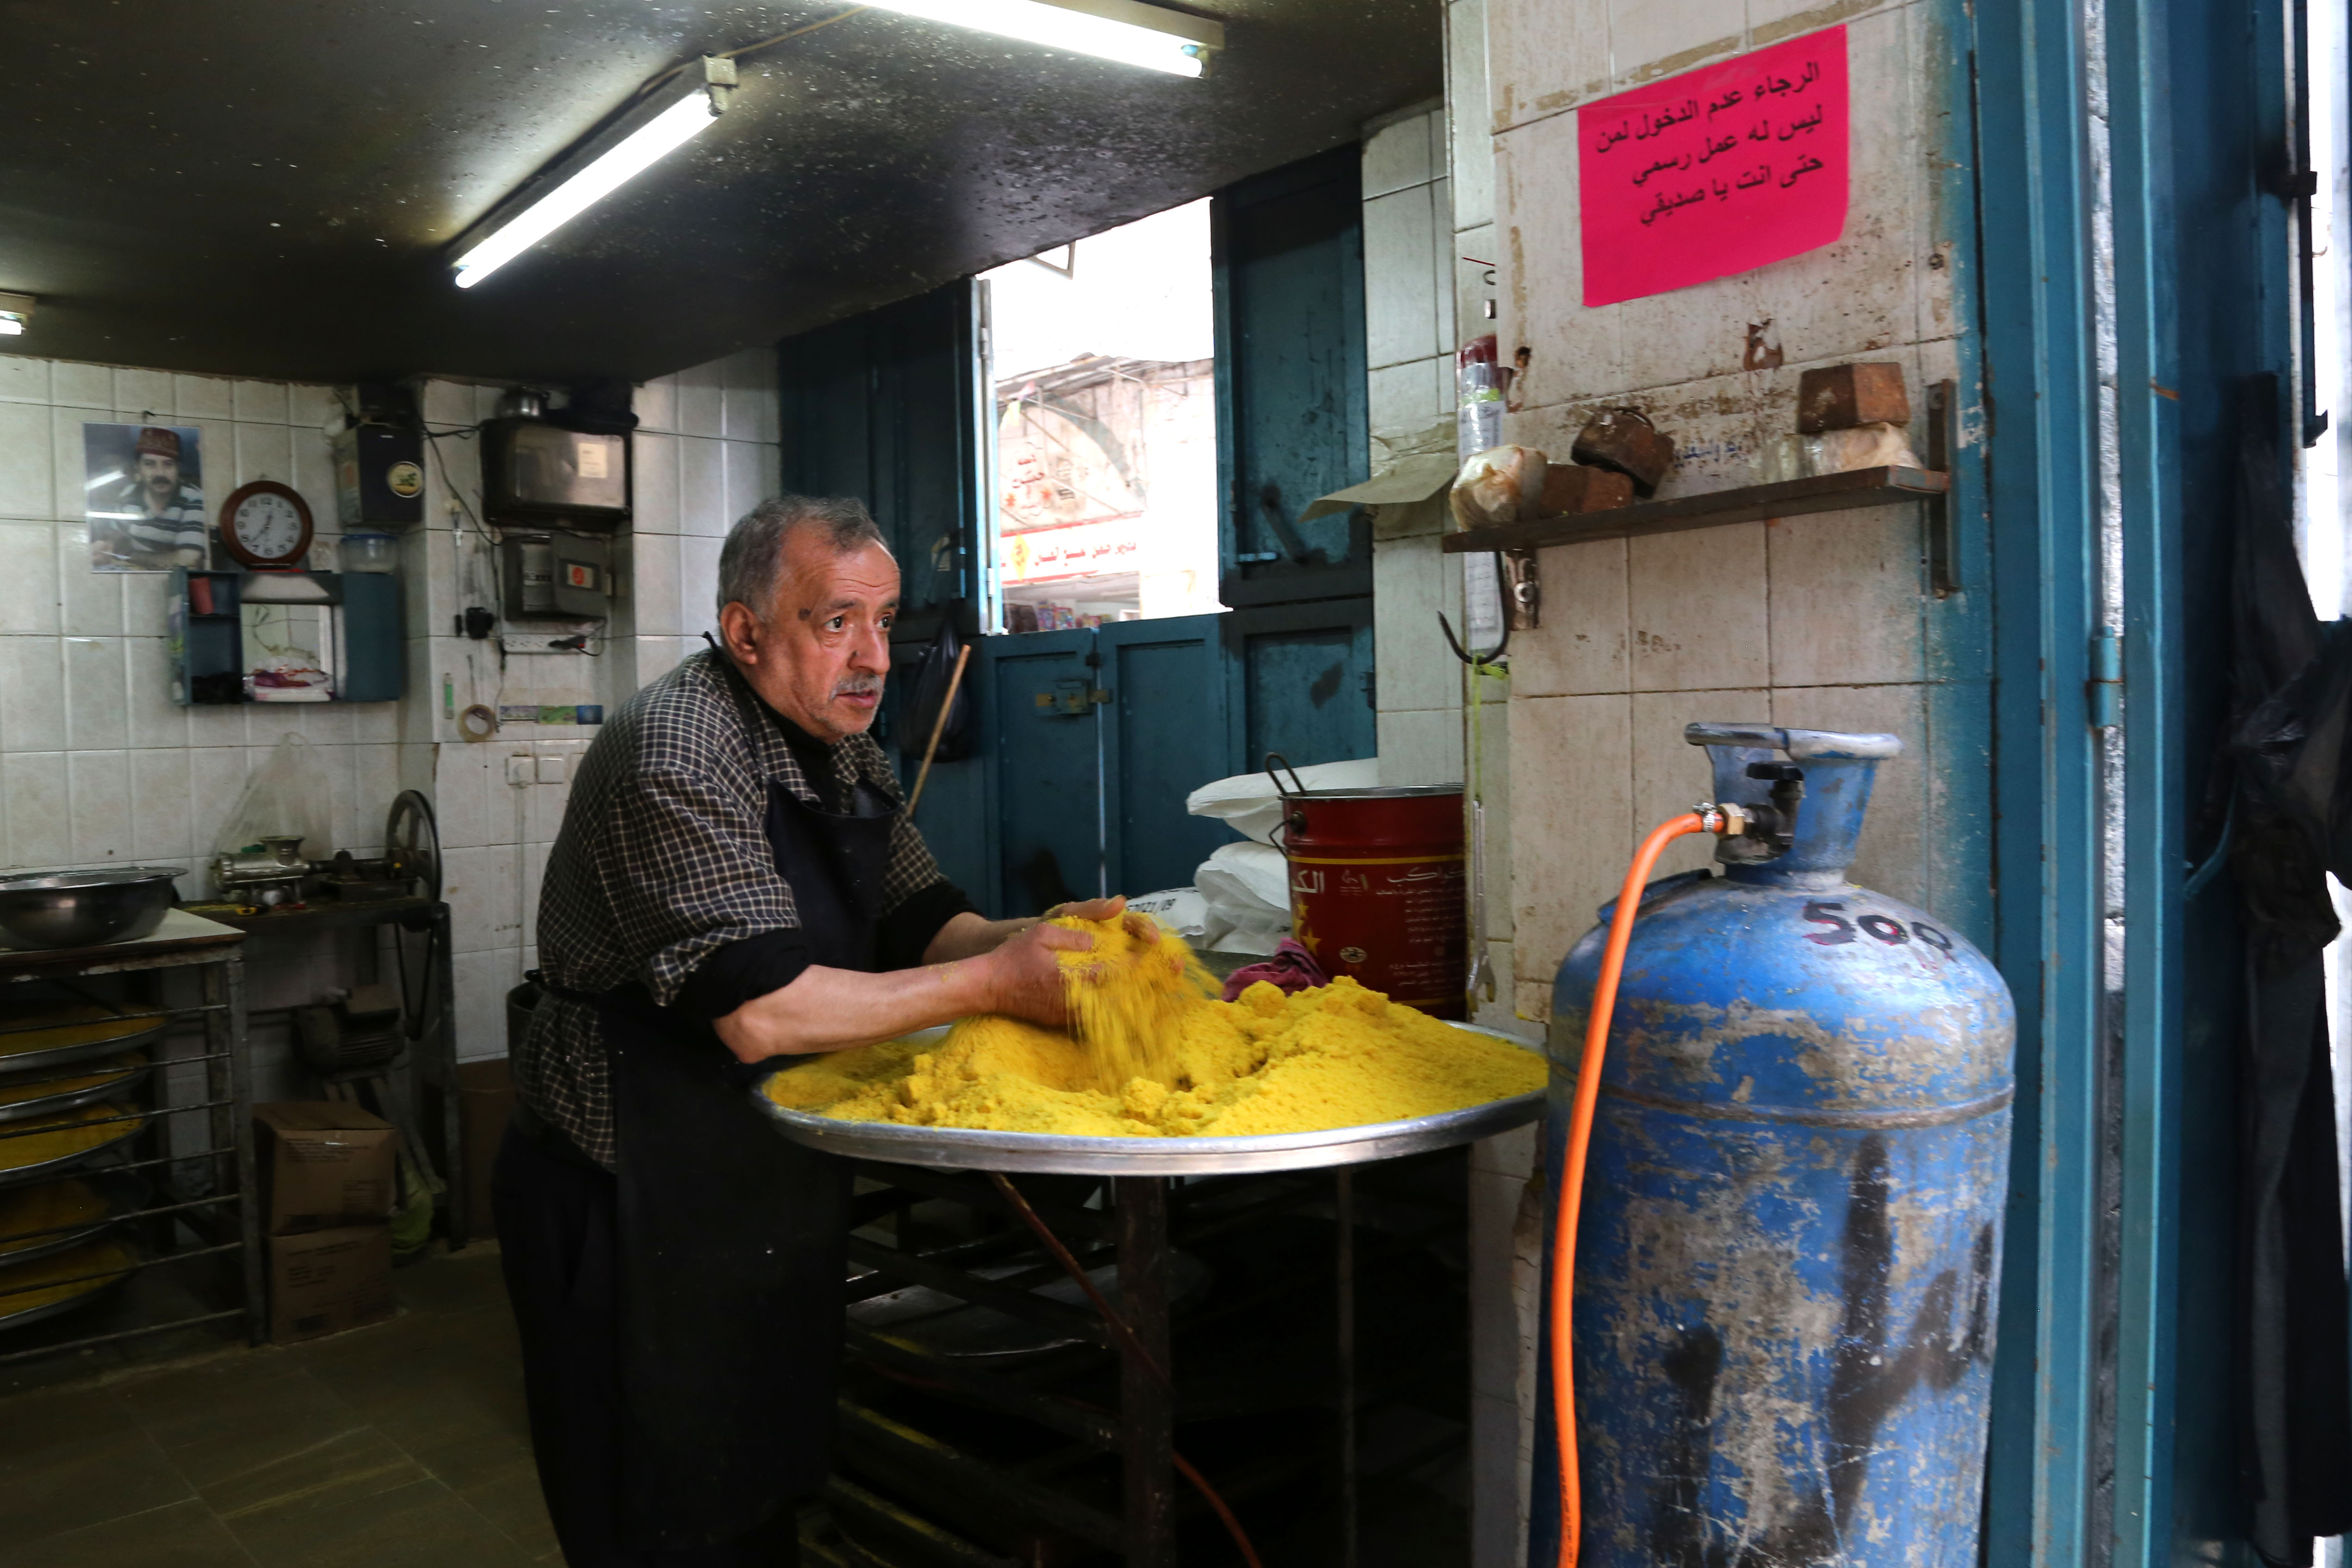 A shop owner in the old city of Nablus makes Kanafeh, a popular dessert made of soft cheese, pastry, and topped with a sugary syrup.